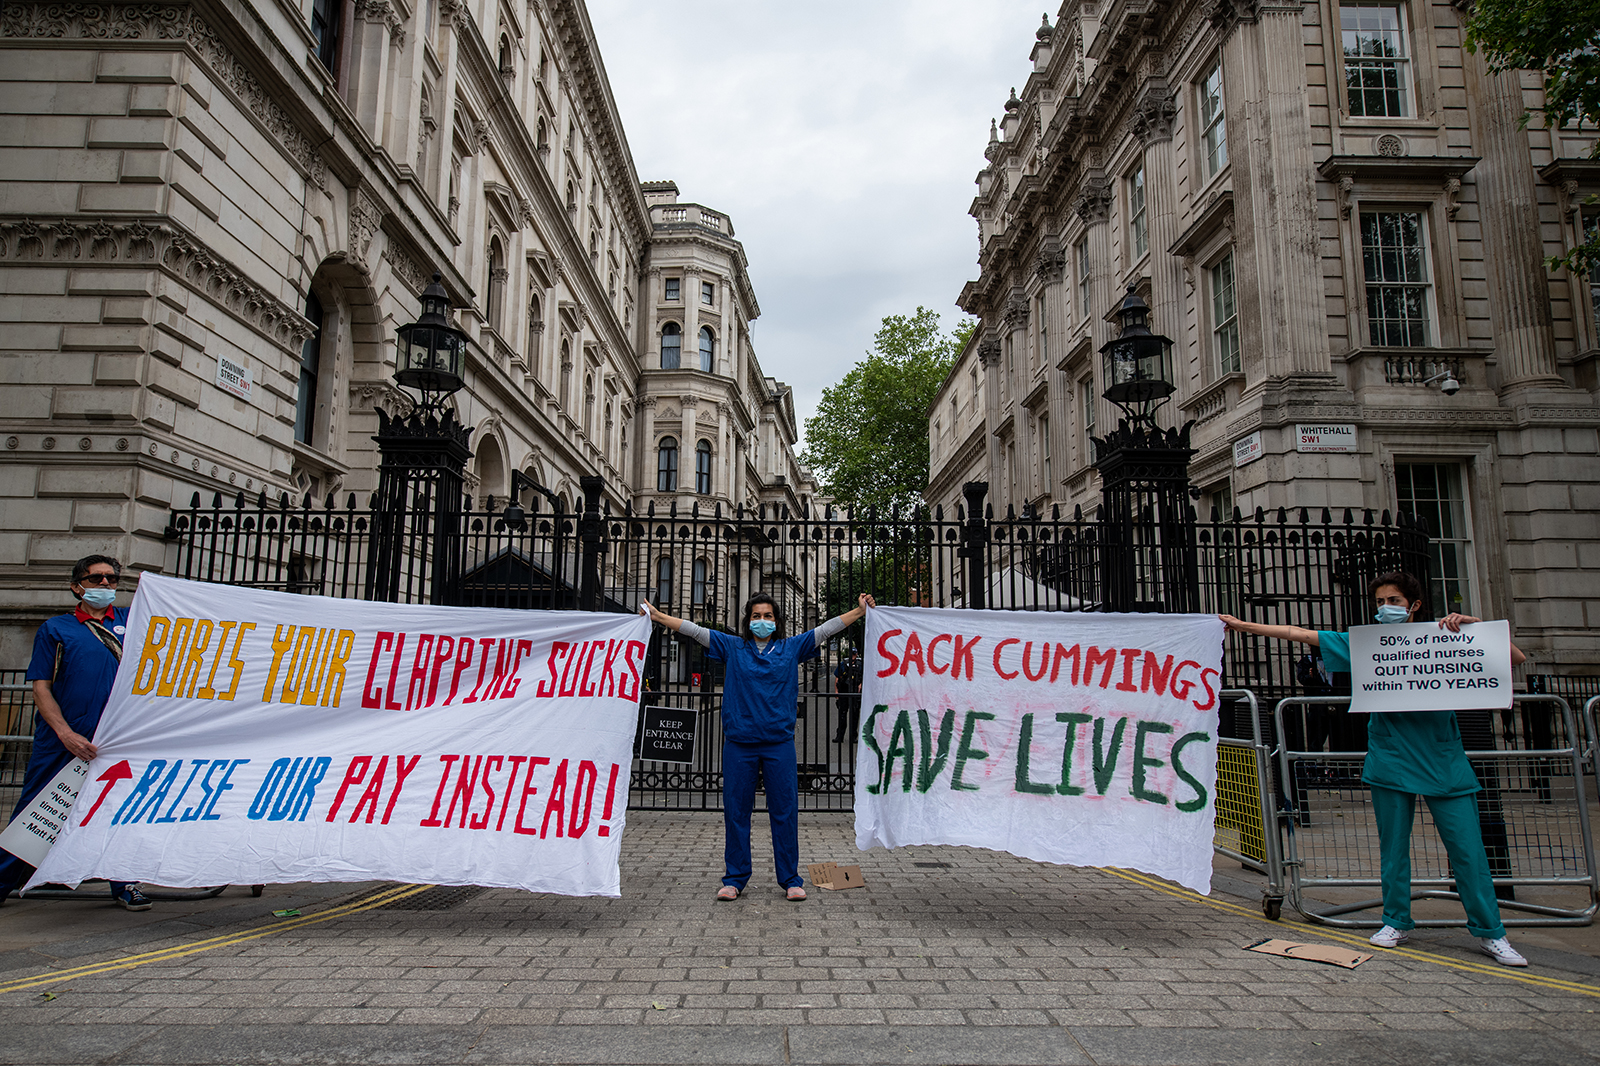 A group of nurses protest outside Downing Street demanding a pay rise, effective protection against Covid-19 and highlighting a disproportionately higher mortality rate among ethnic minority groups on June 3 in London.